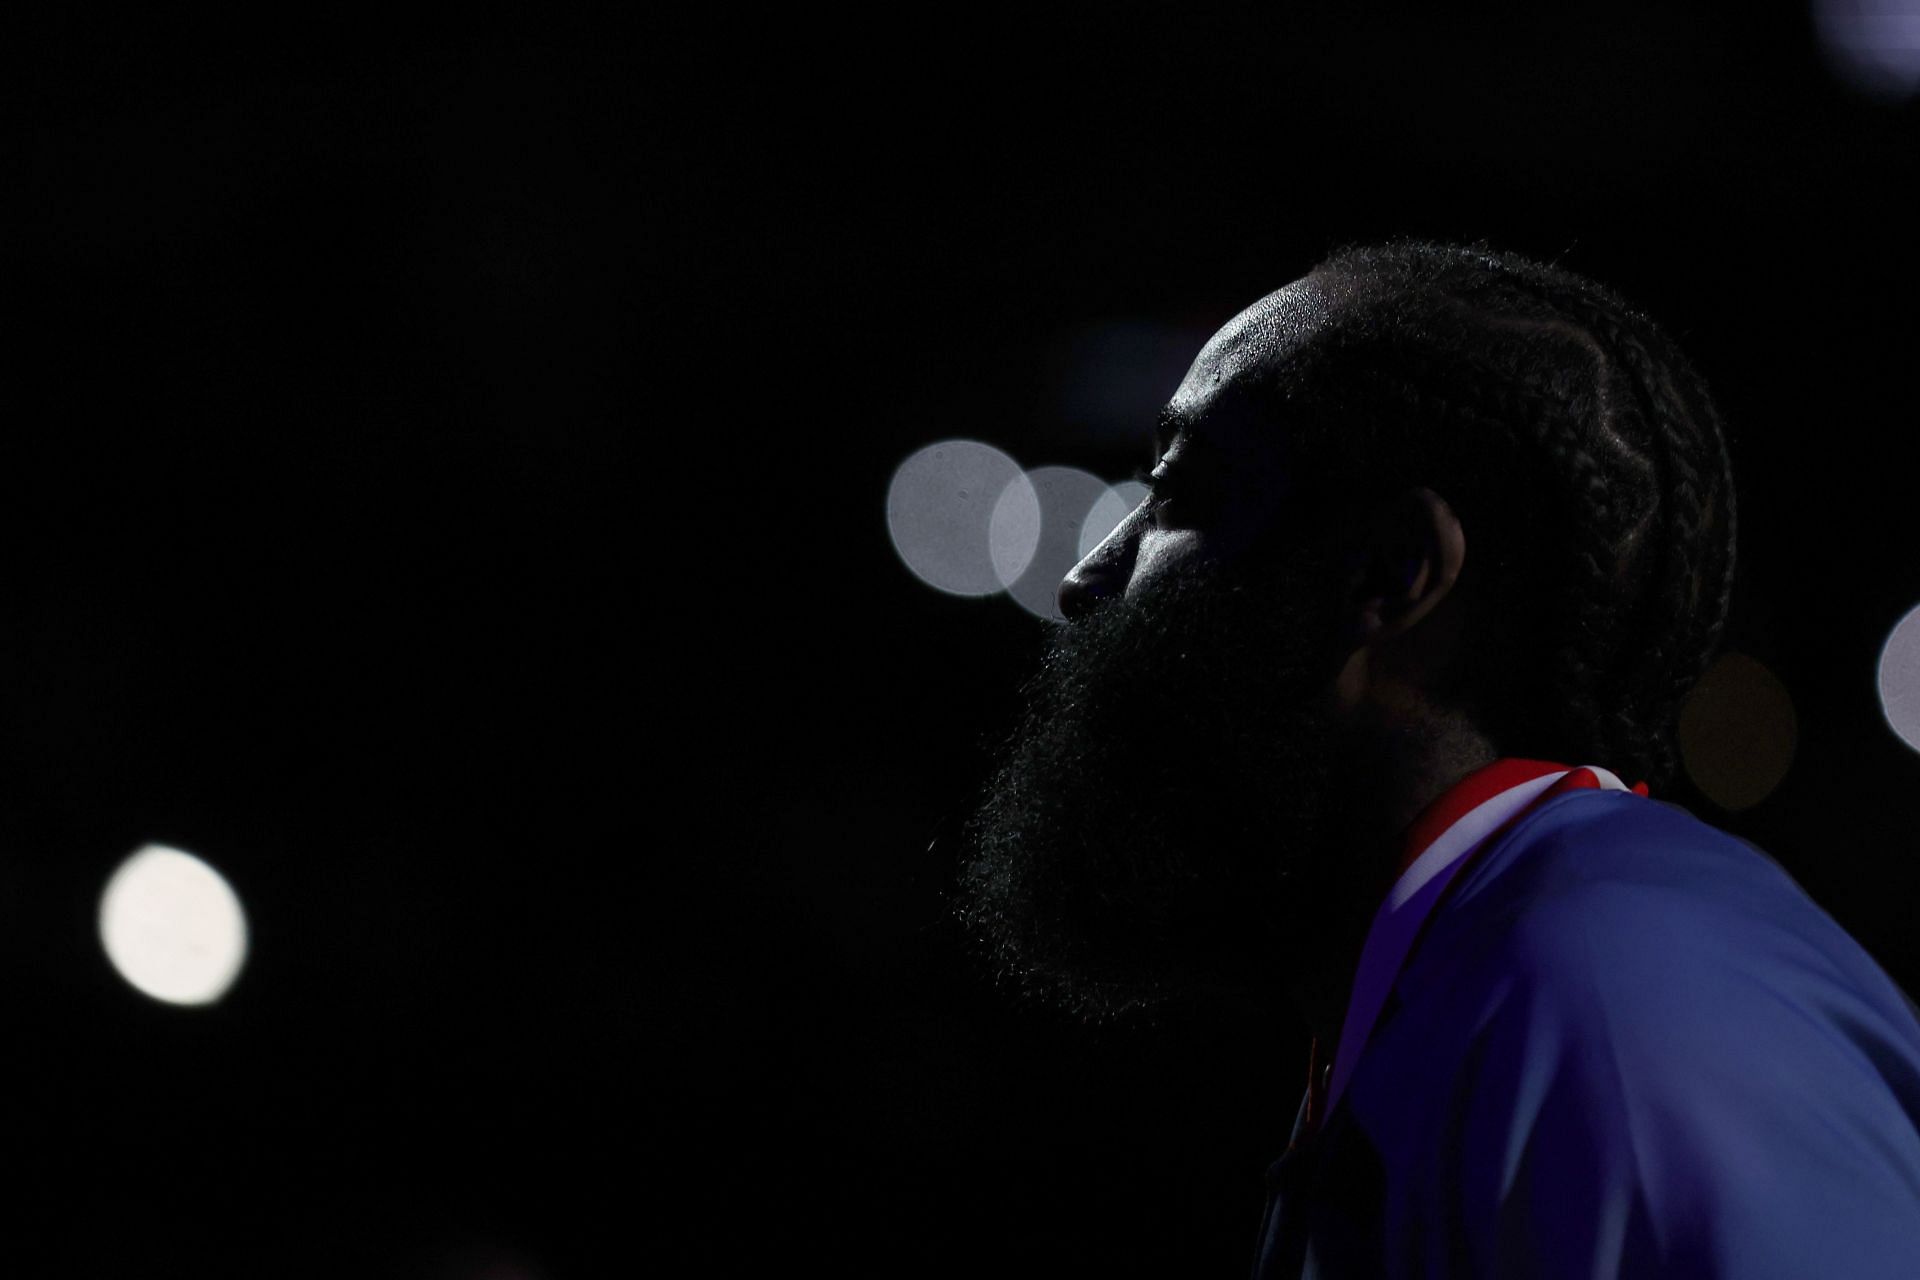 James Harden will have to play at his best if the Philadelphia 76ers want to win the championship this season.